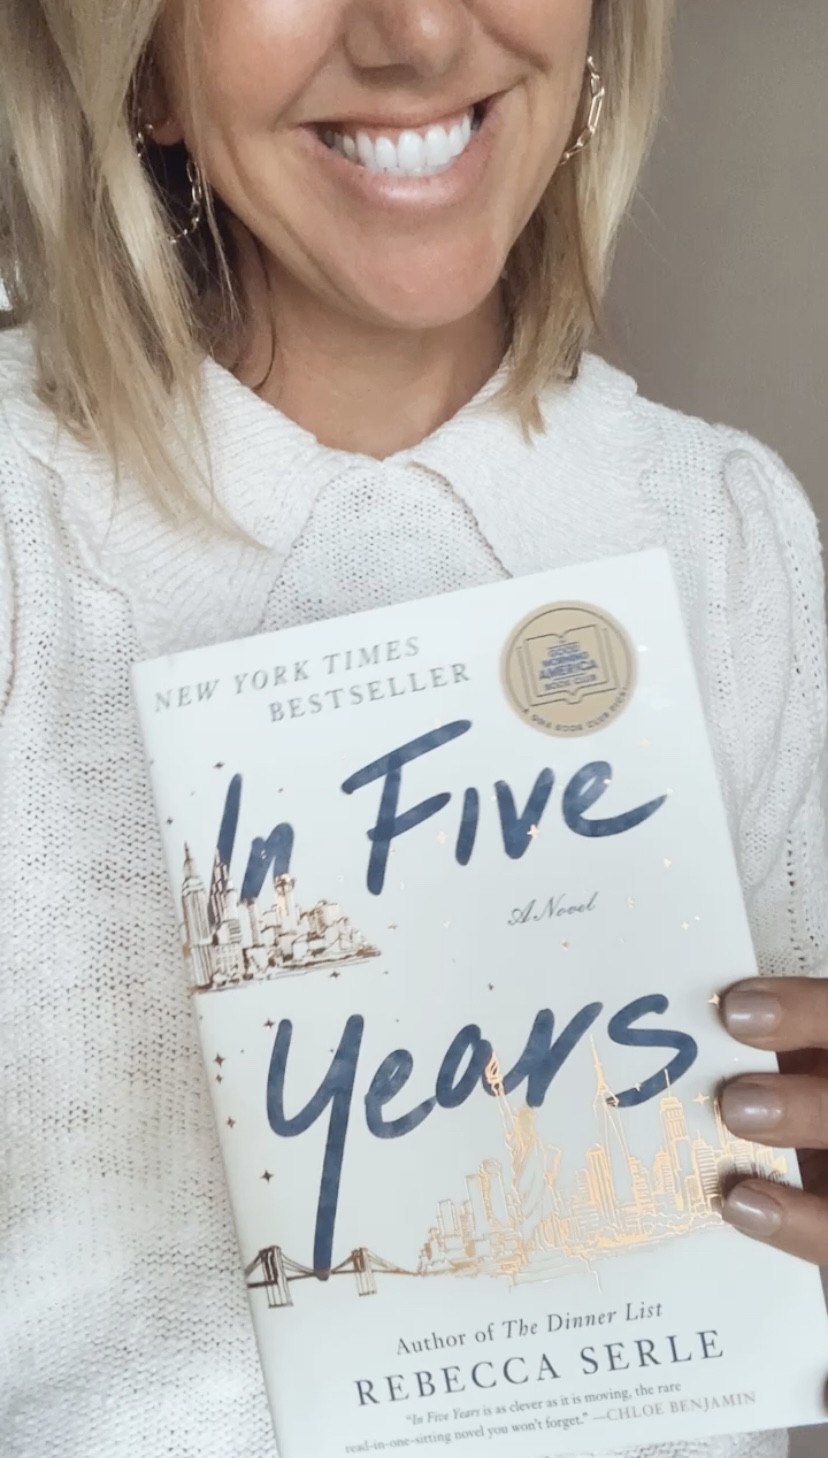 book in five years by rebecca serle